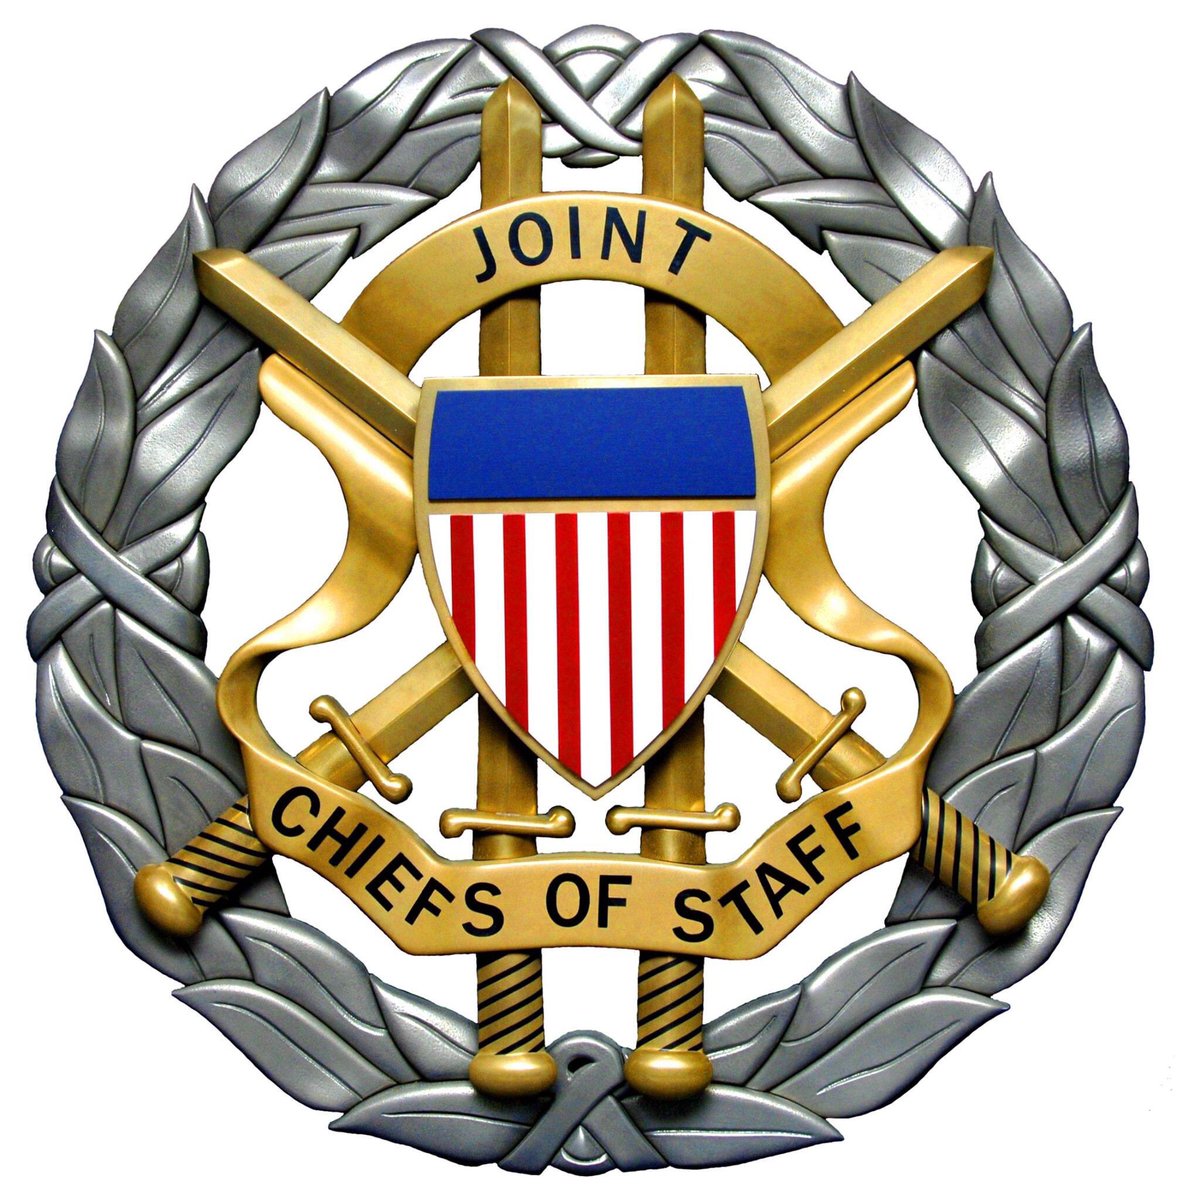 On this day in 1947, President Truman signed the National Security Act into law, creating the Joint Chiefs of Staff and the Joint Staff. #KnowYourMil and the role of the Joint Chiefs of Staff to support our national security in the @DeptofDefense: jcs.mil/About/